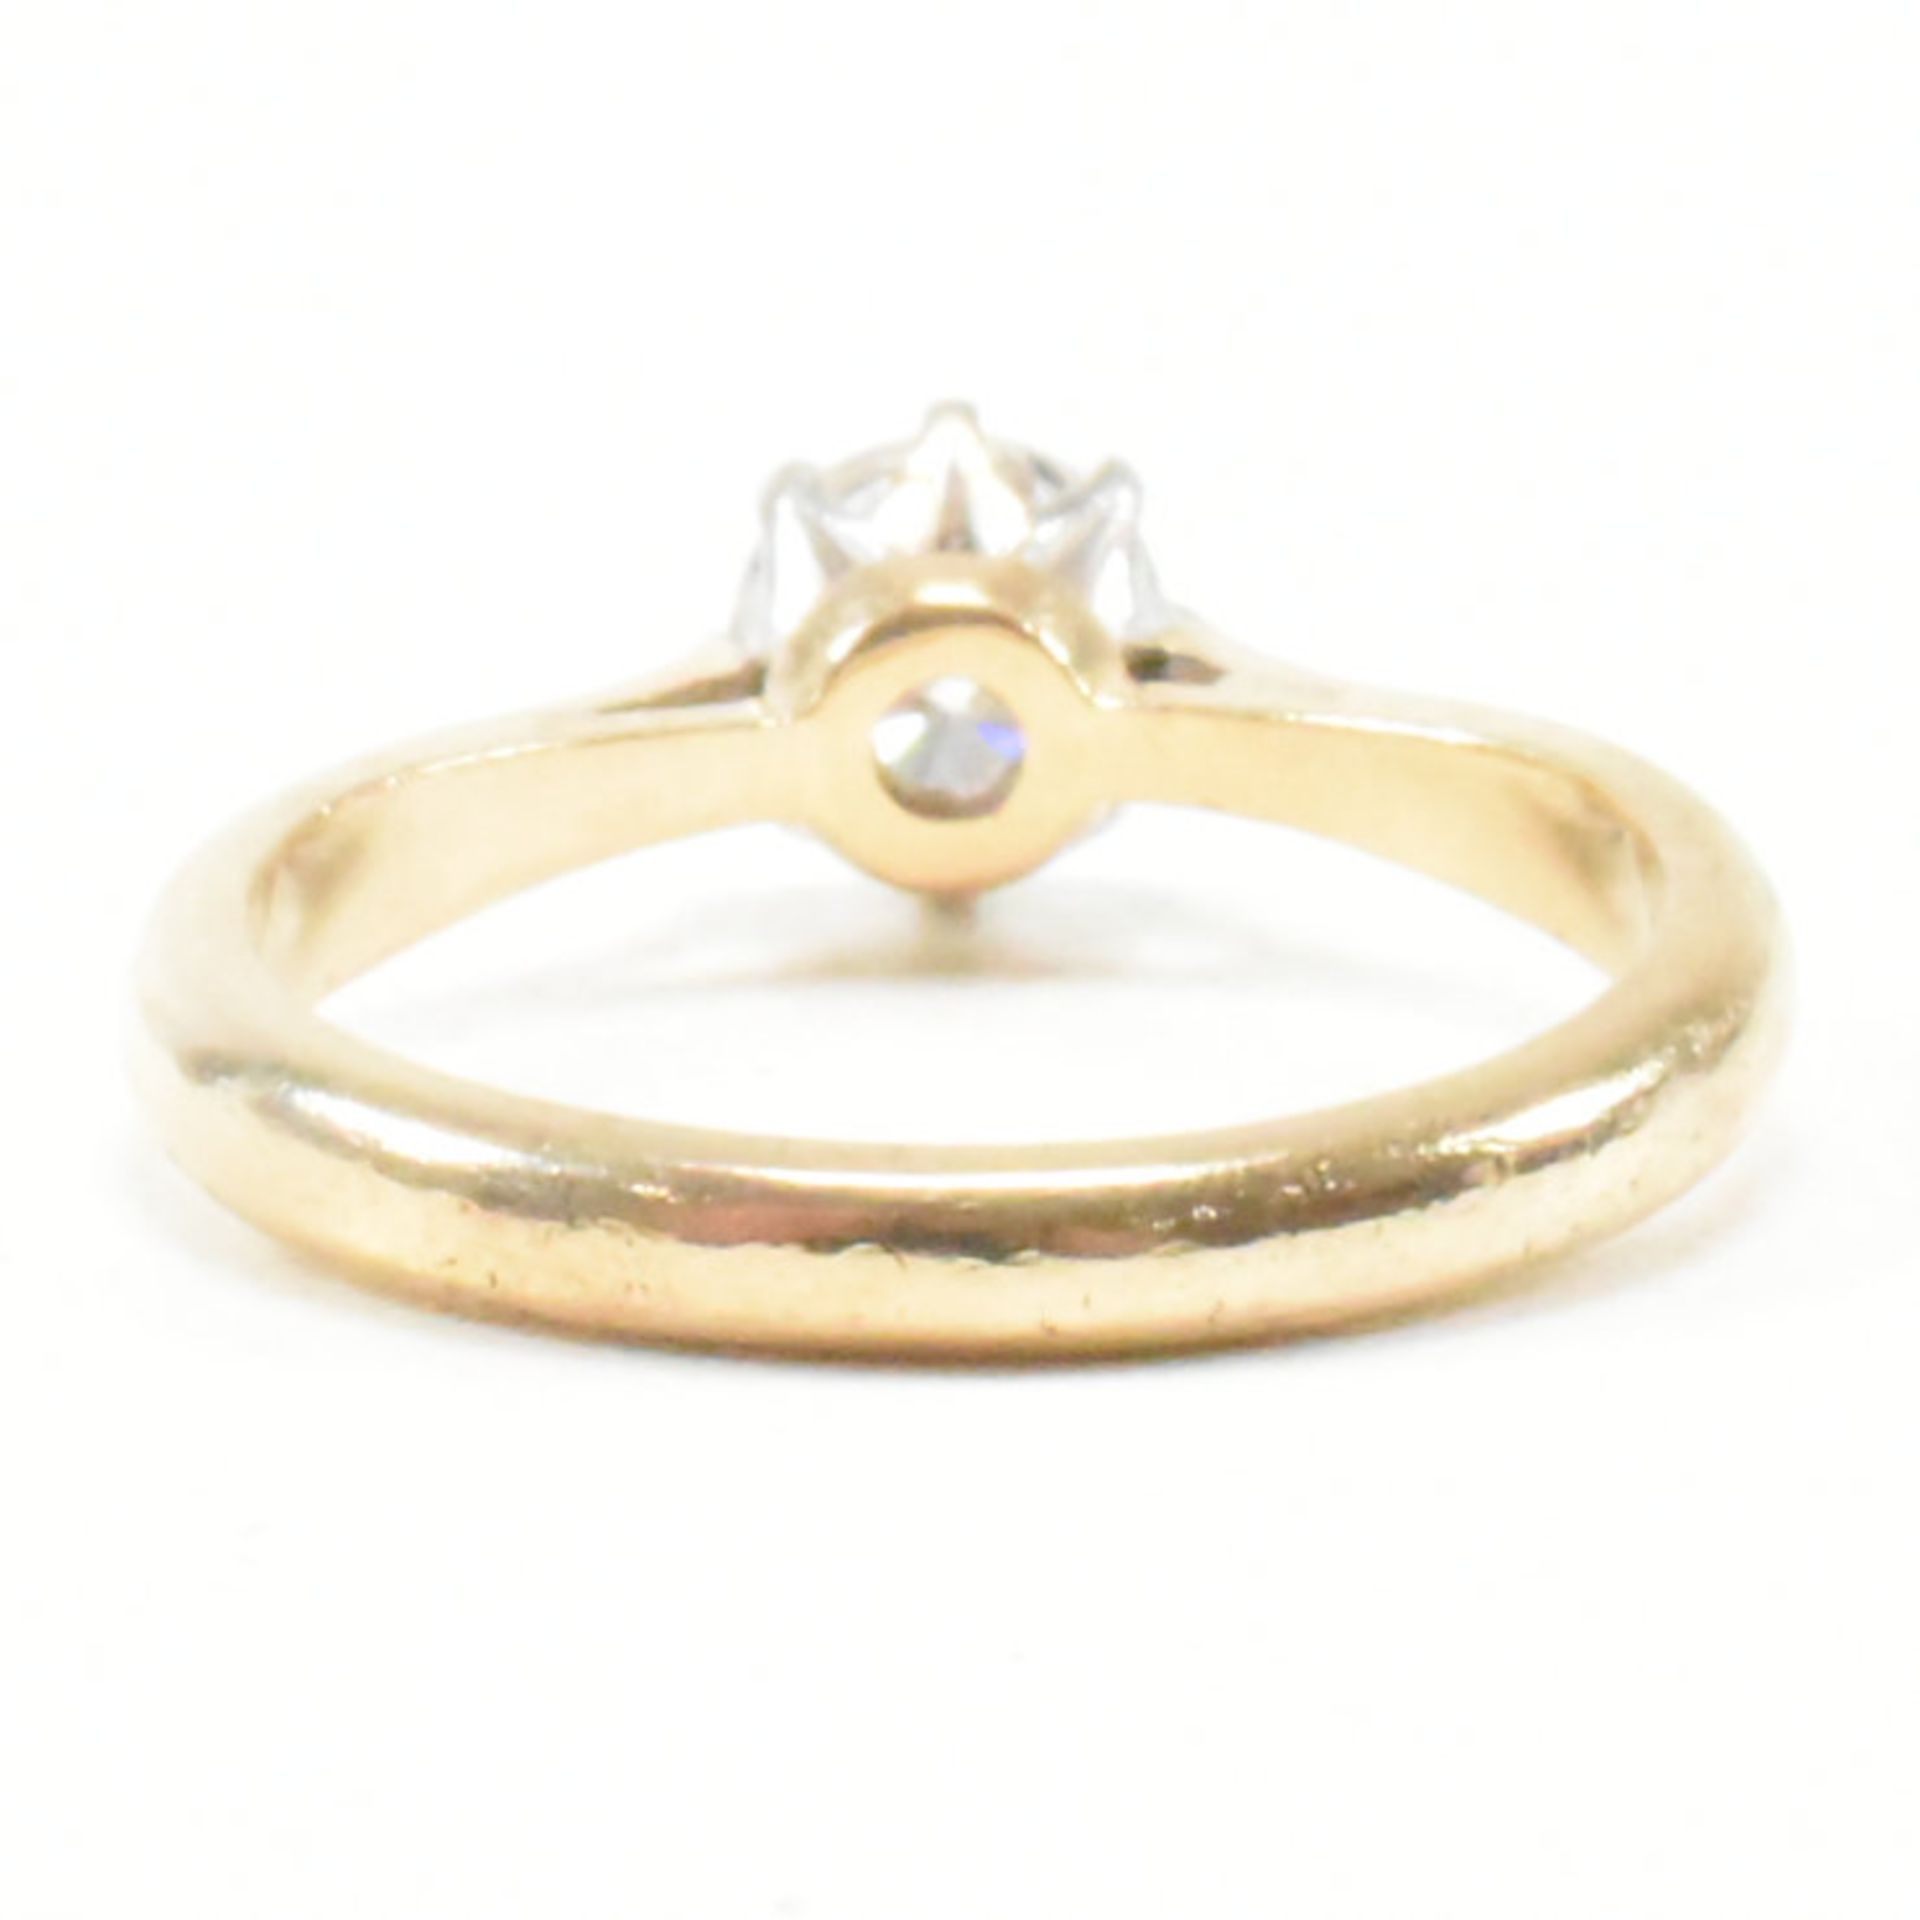 18CT GOLD & DIAMOND SOLITAIRE RING - Image 5 of 7